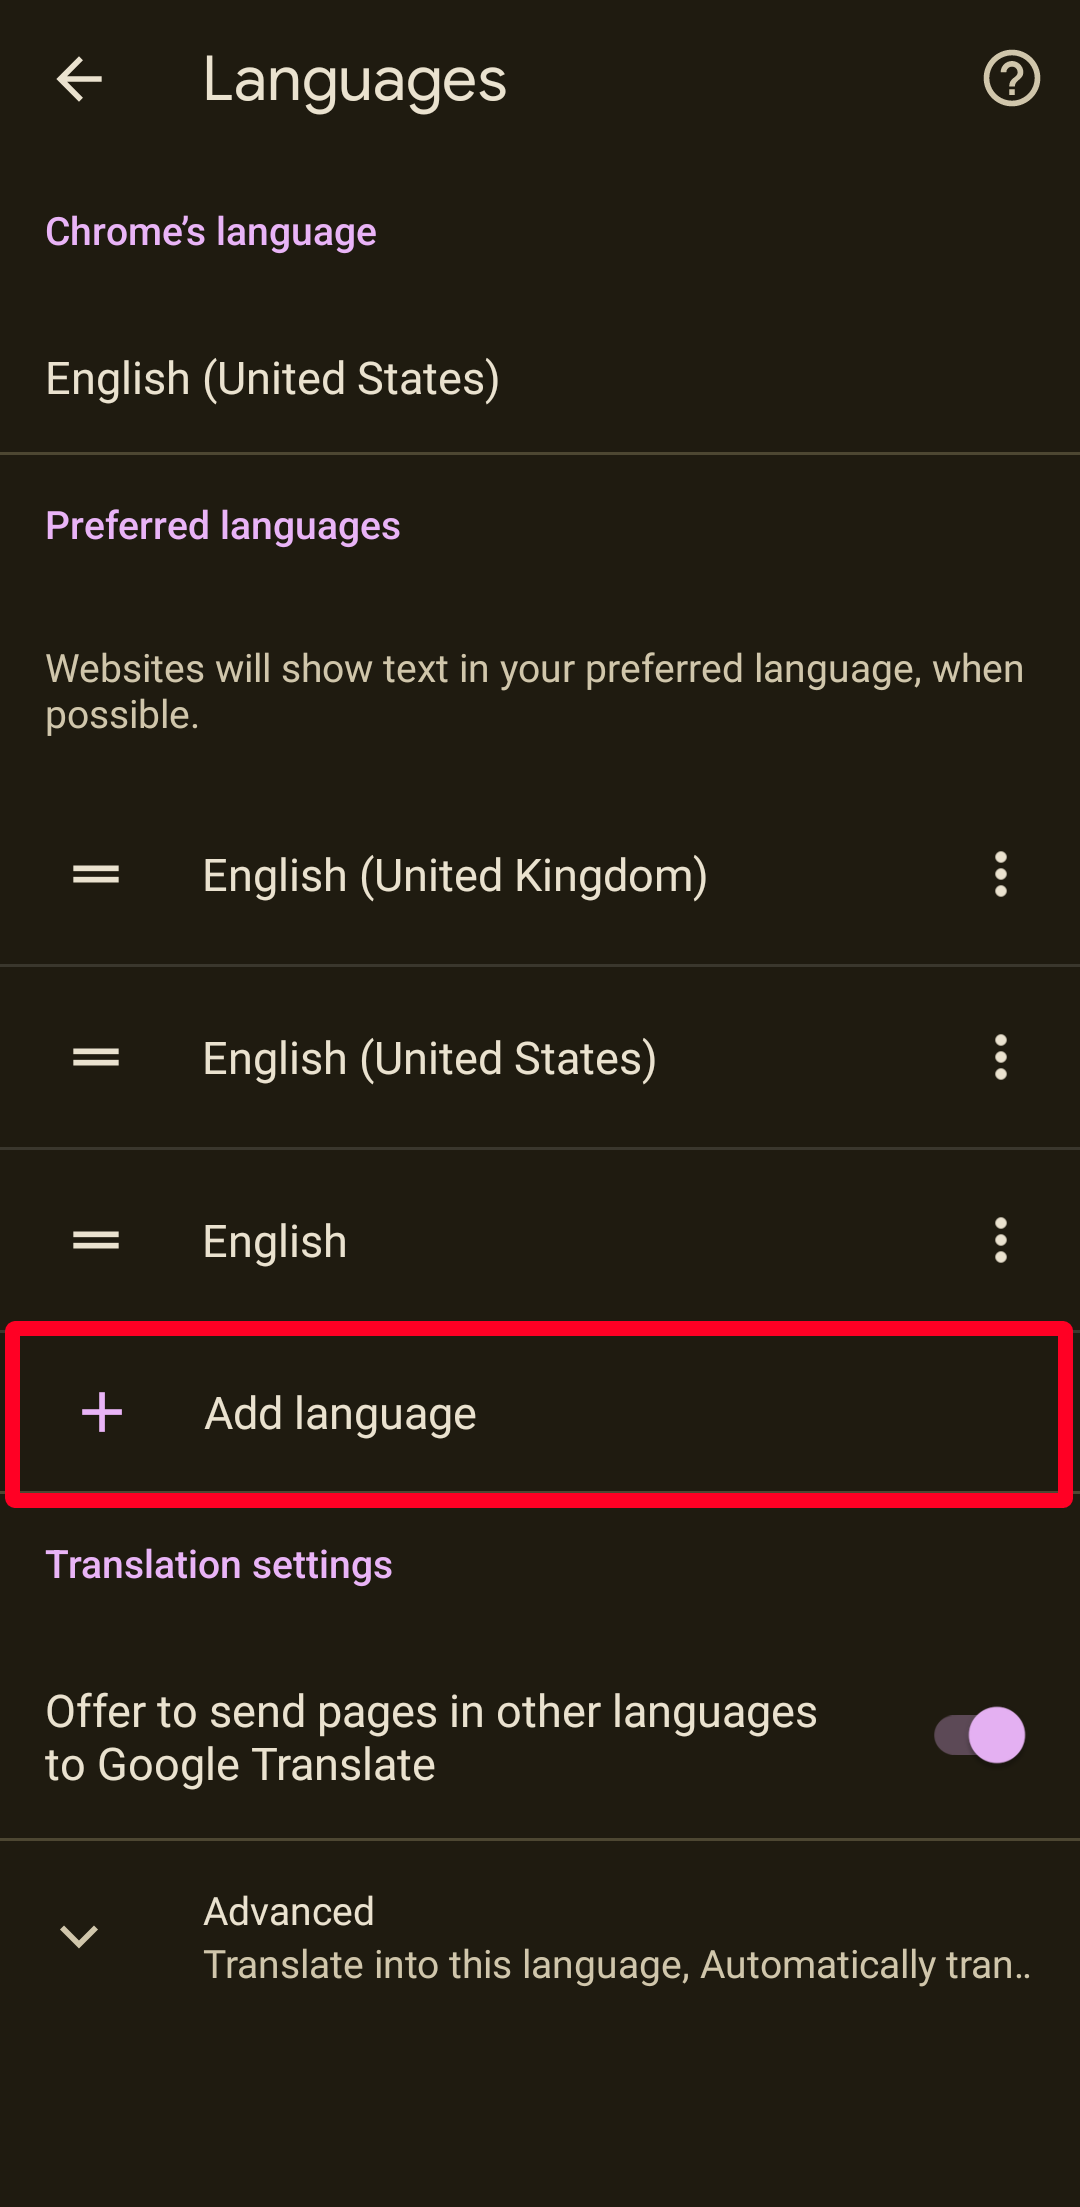 Chrome Languages settings menu on Android.